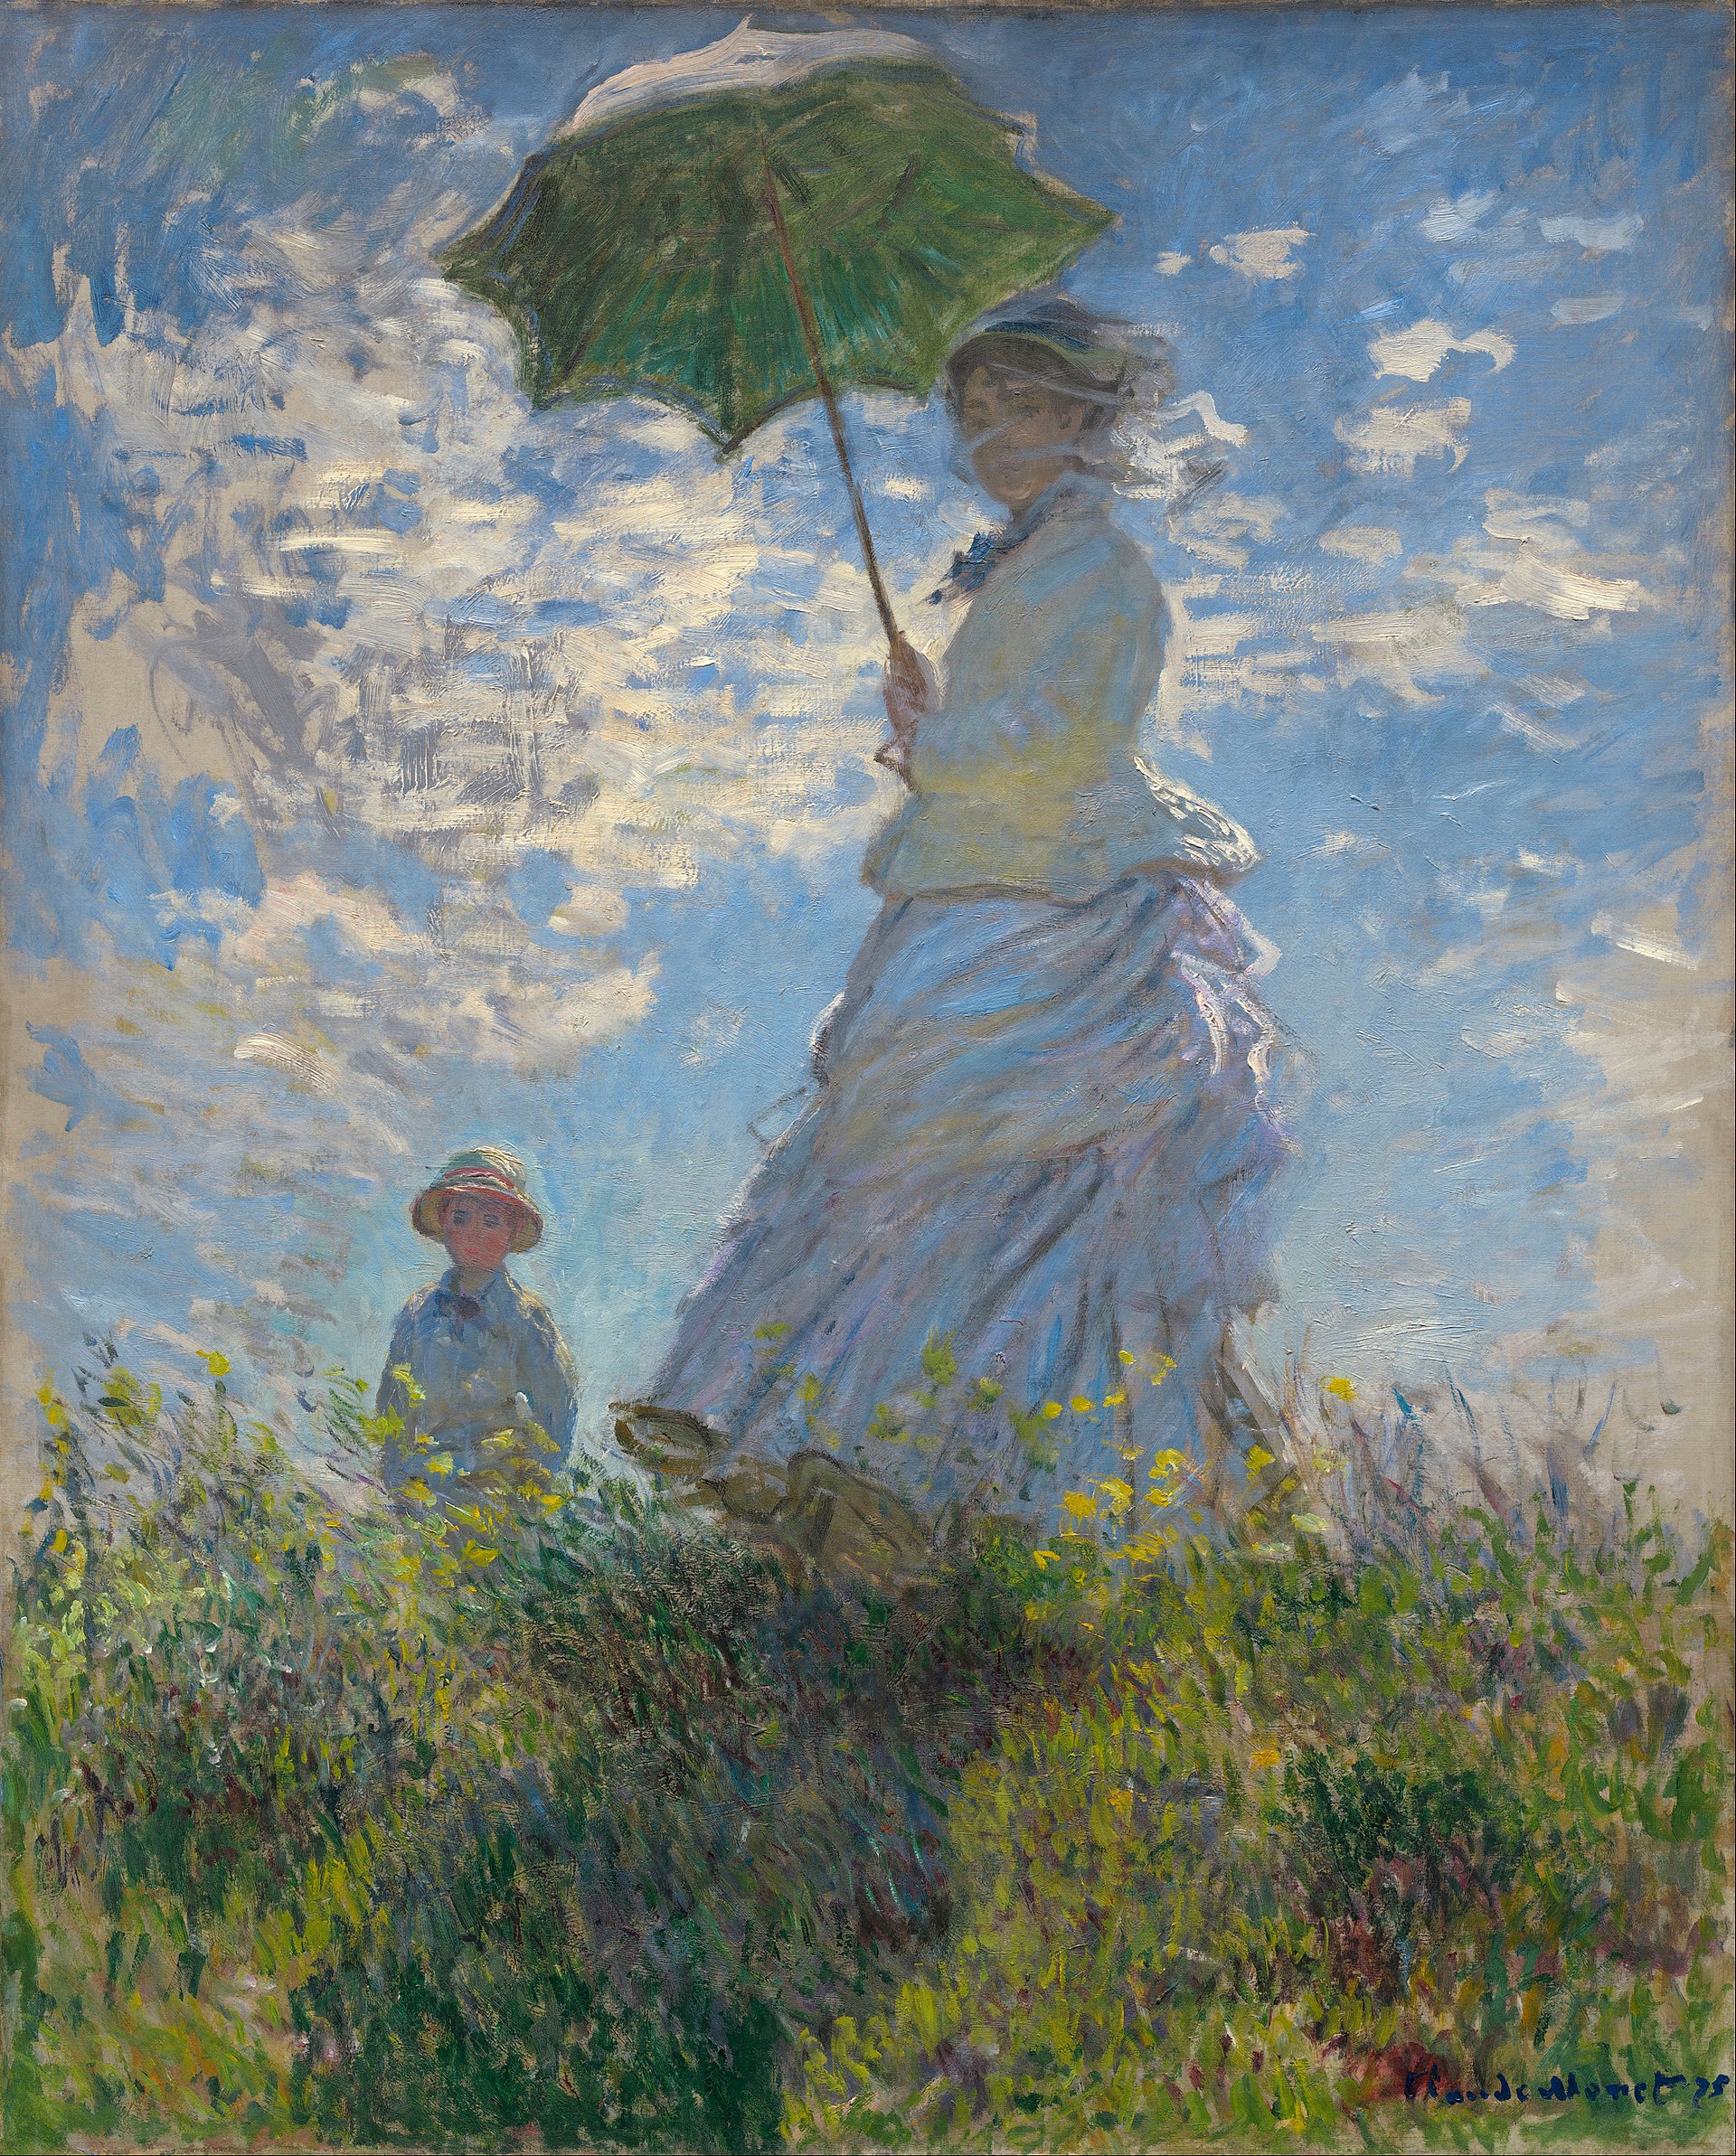 painting by Monet of a woman with a boy holding a parasol